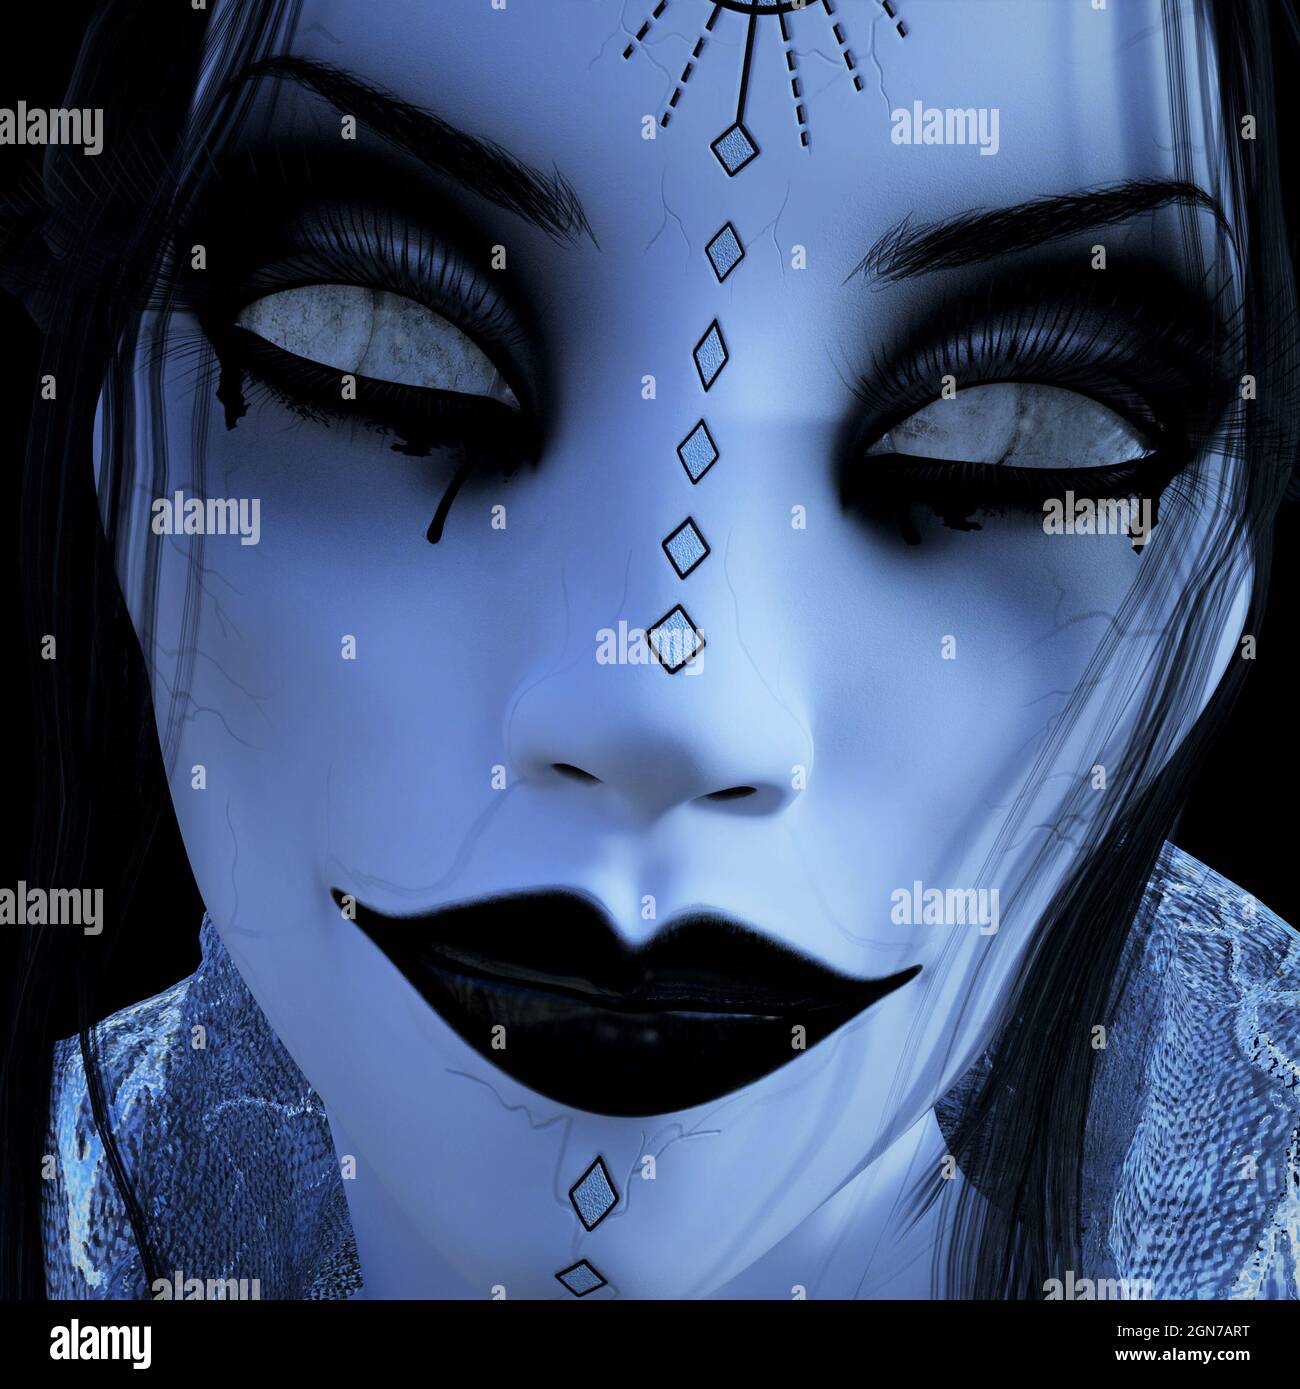 Close 3d illustration of the head of a blue hued zombie woman with elaborate facial tattoos on a black background. Stock Photo